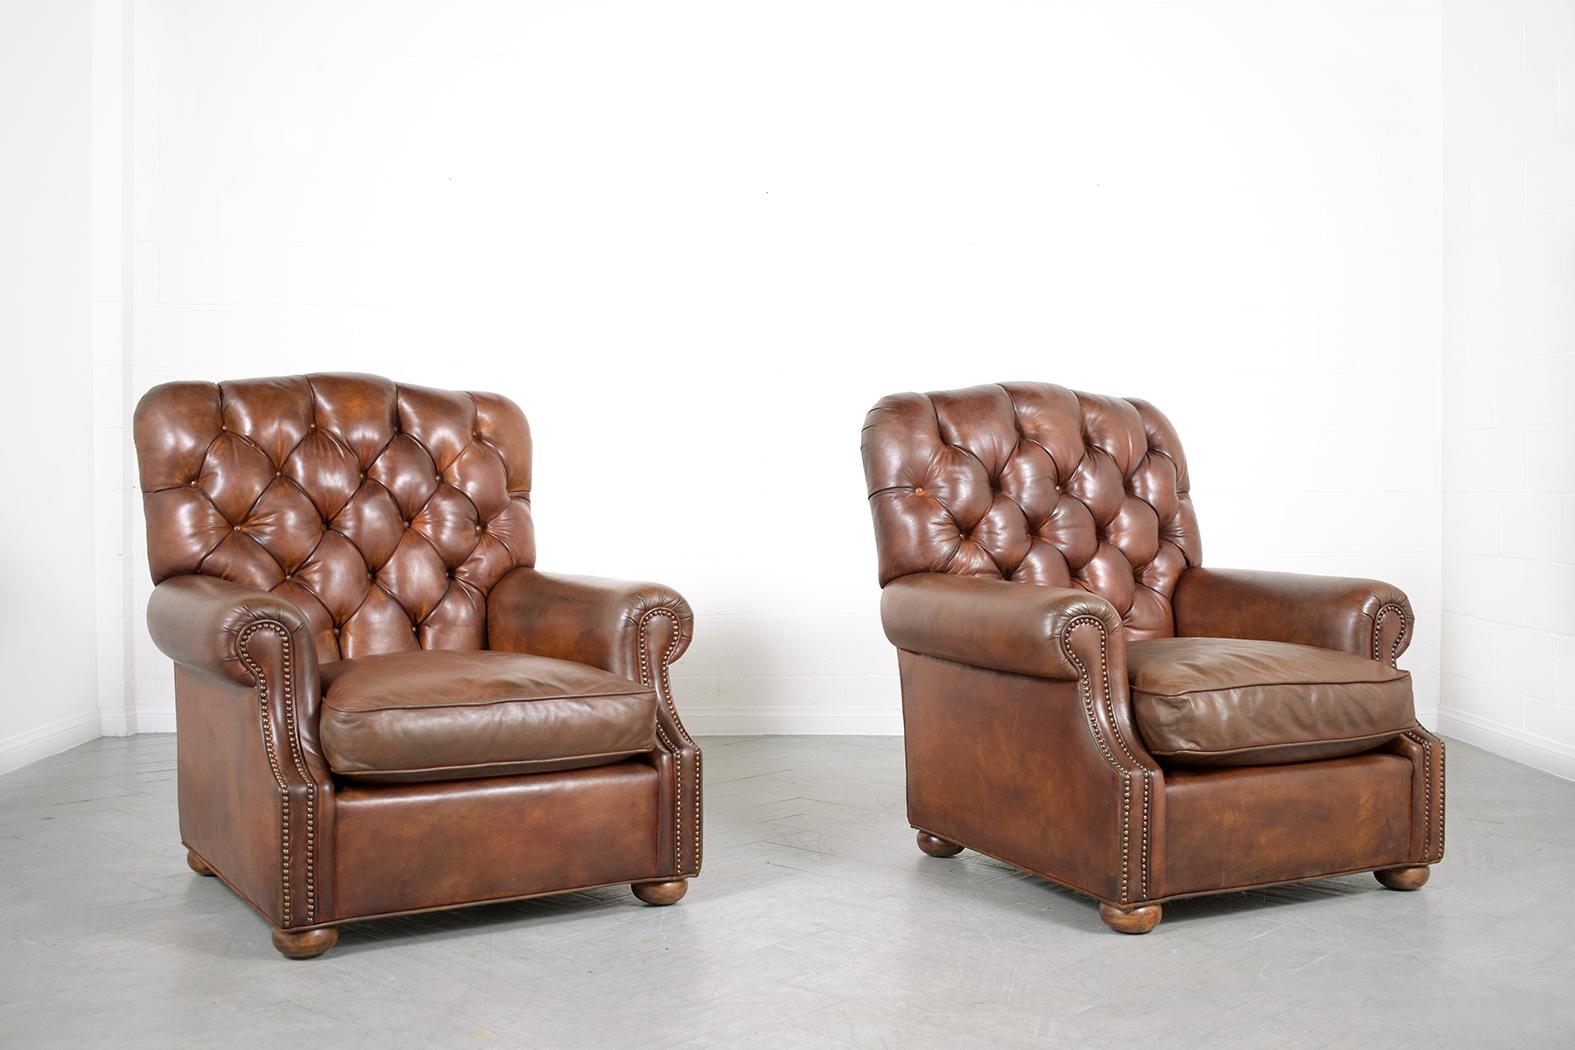 Metal Vintage Pair of Leather Chesterfield Chairs